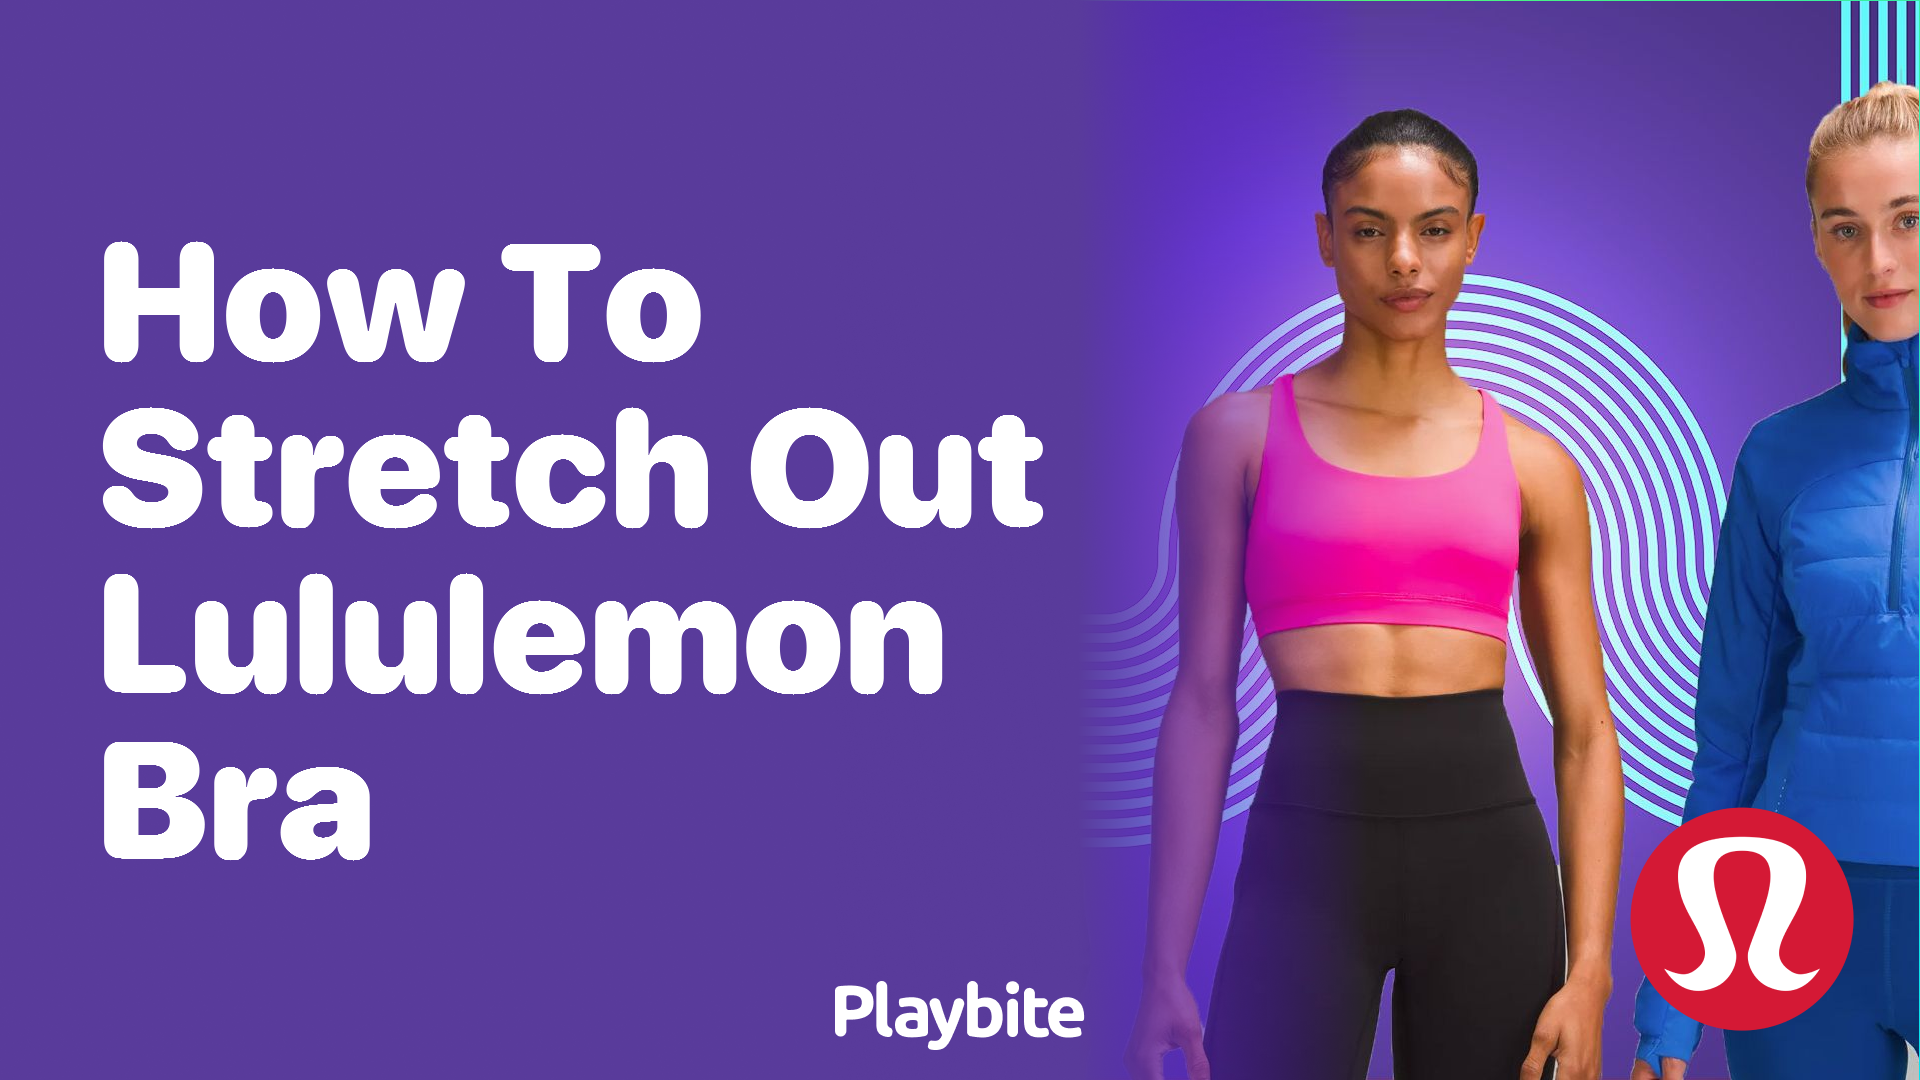 How to Stretch Out a Lululemon Bra: Simple Steps - Playbite